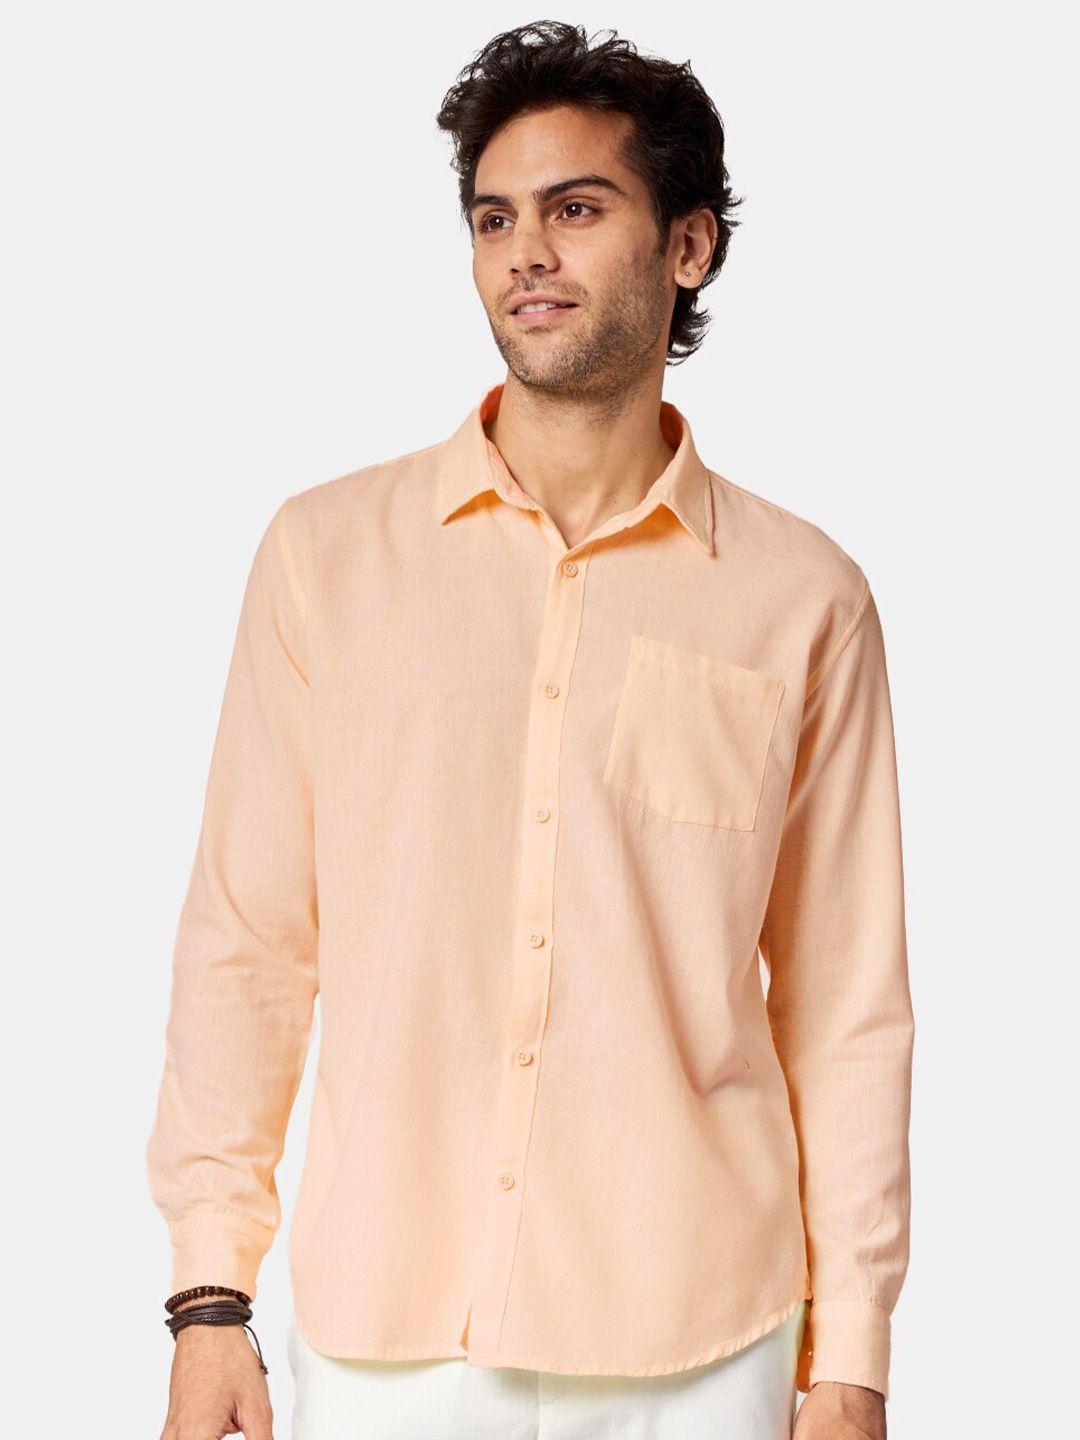 the souled store men regular fit solid cotton casual shirt